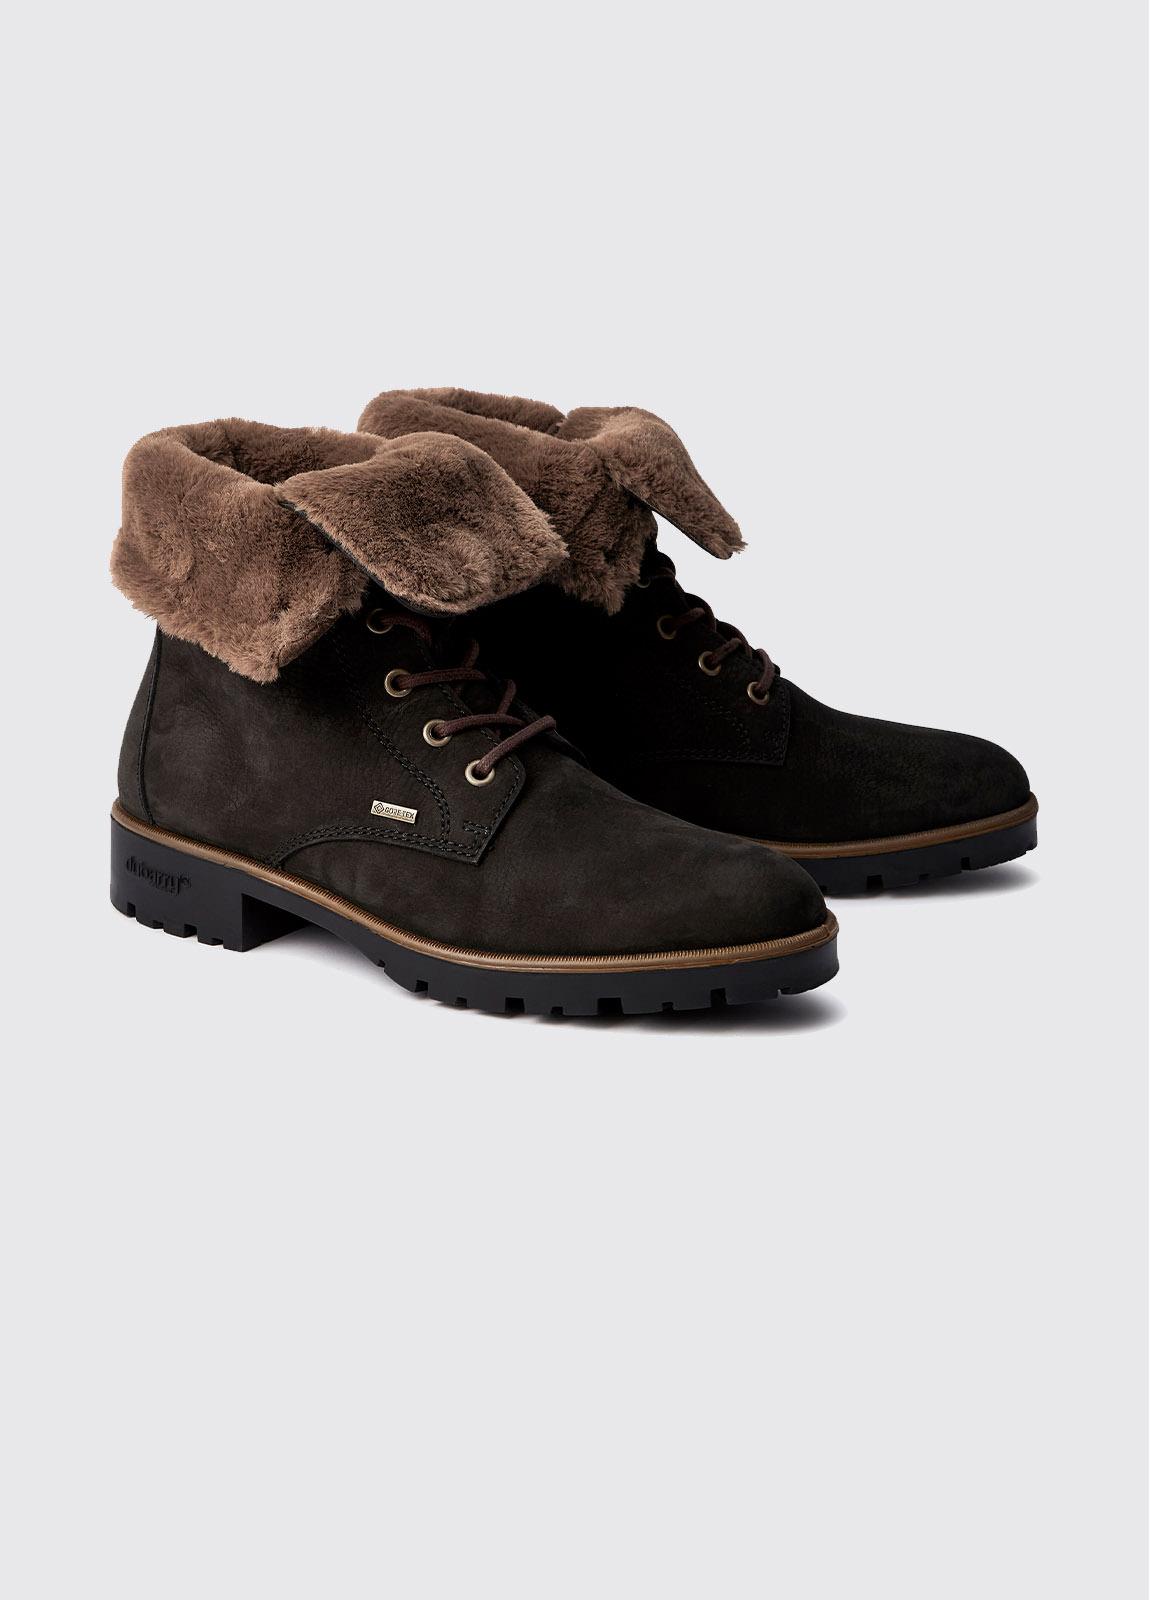 Ladies Fur Lined Boots, Warm Winter Boots